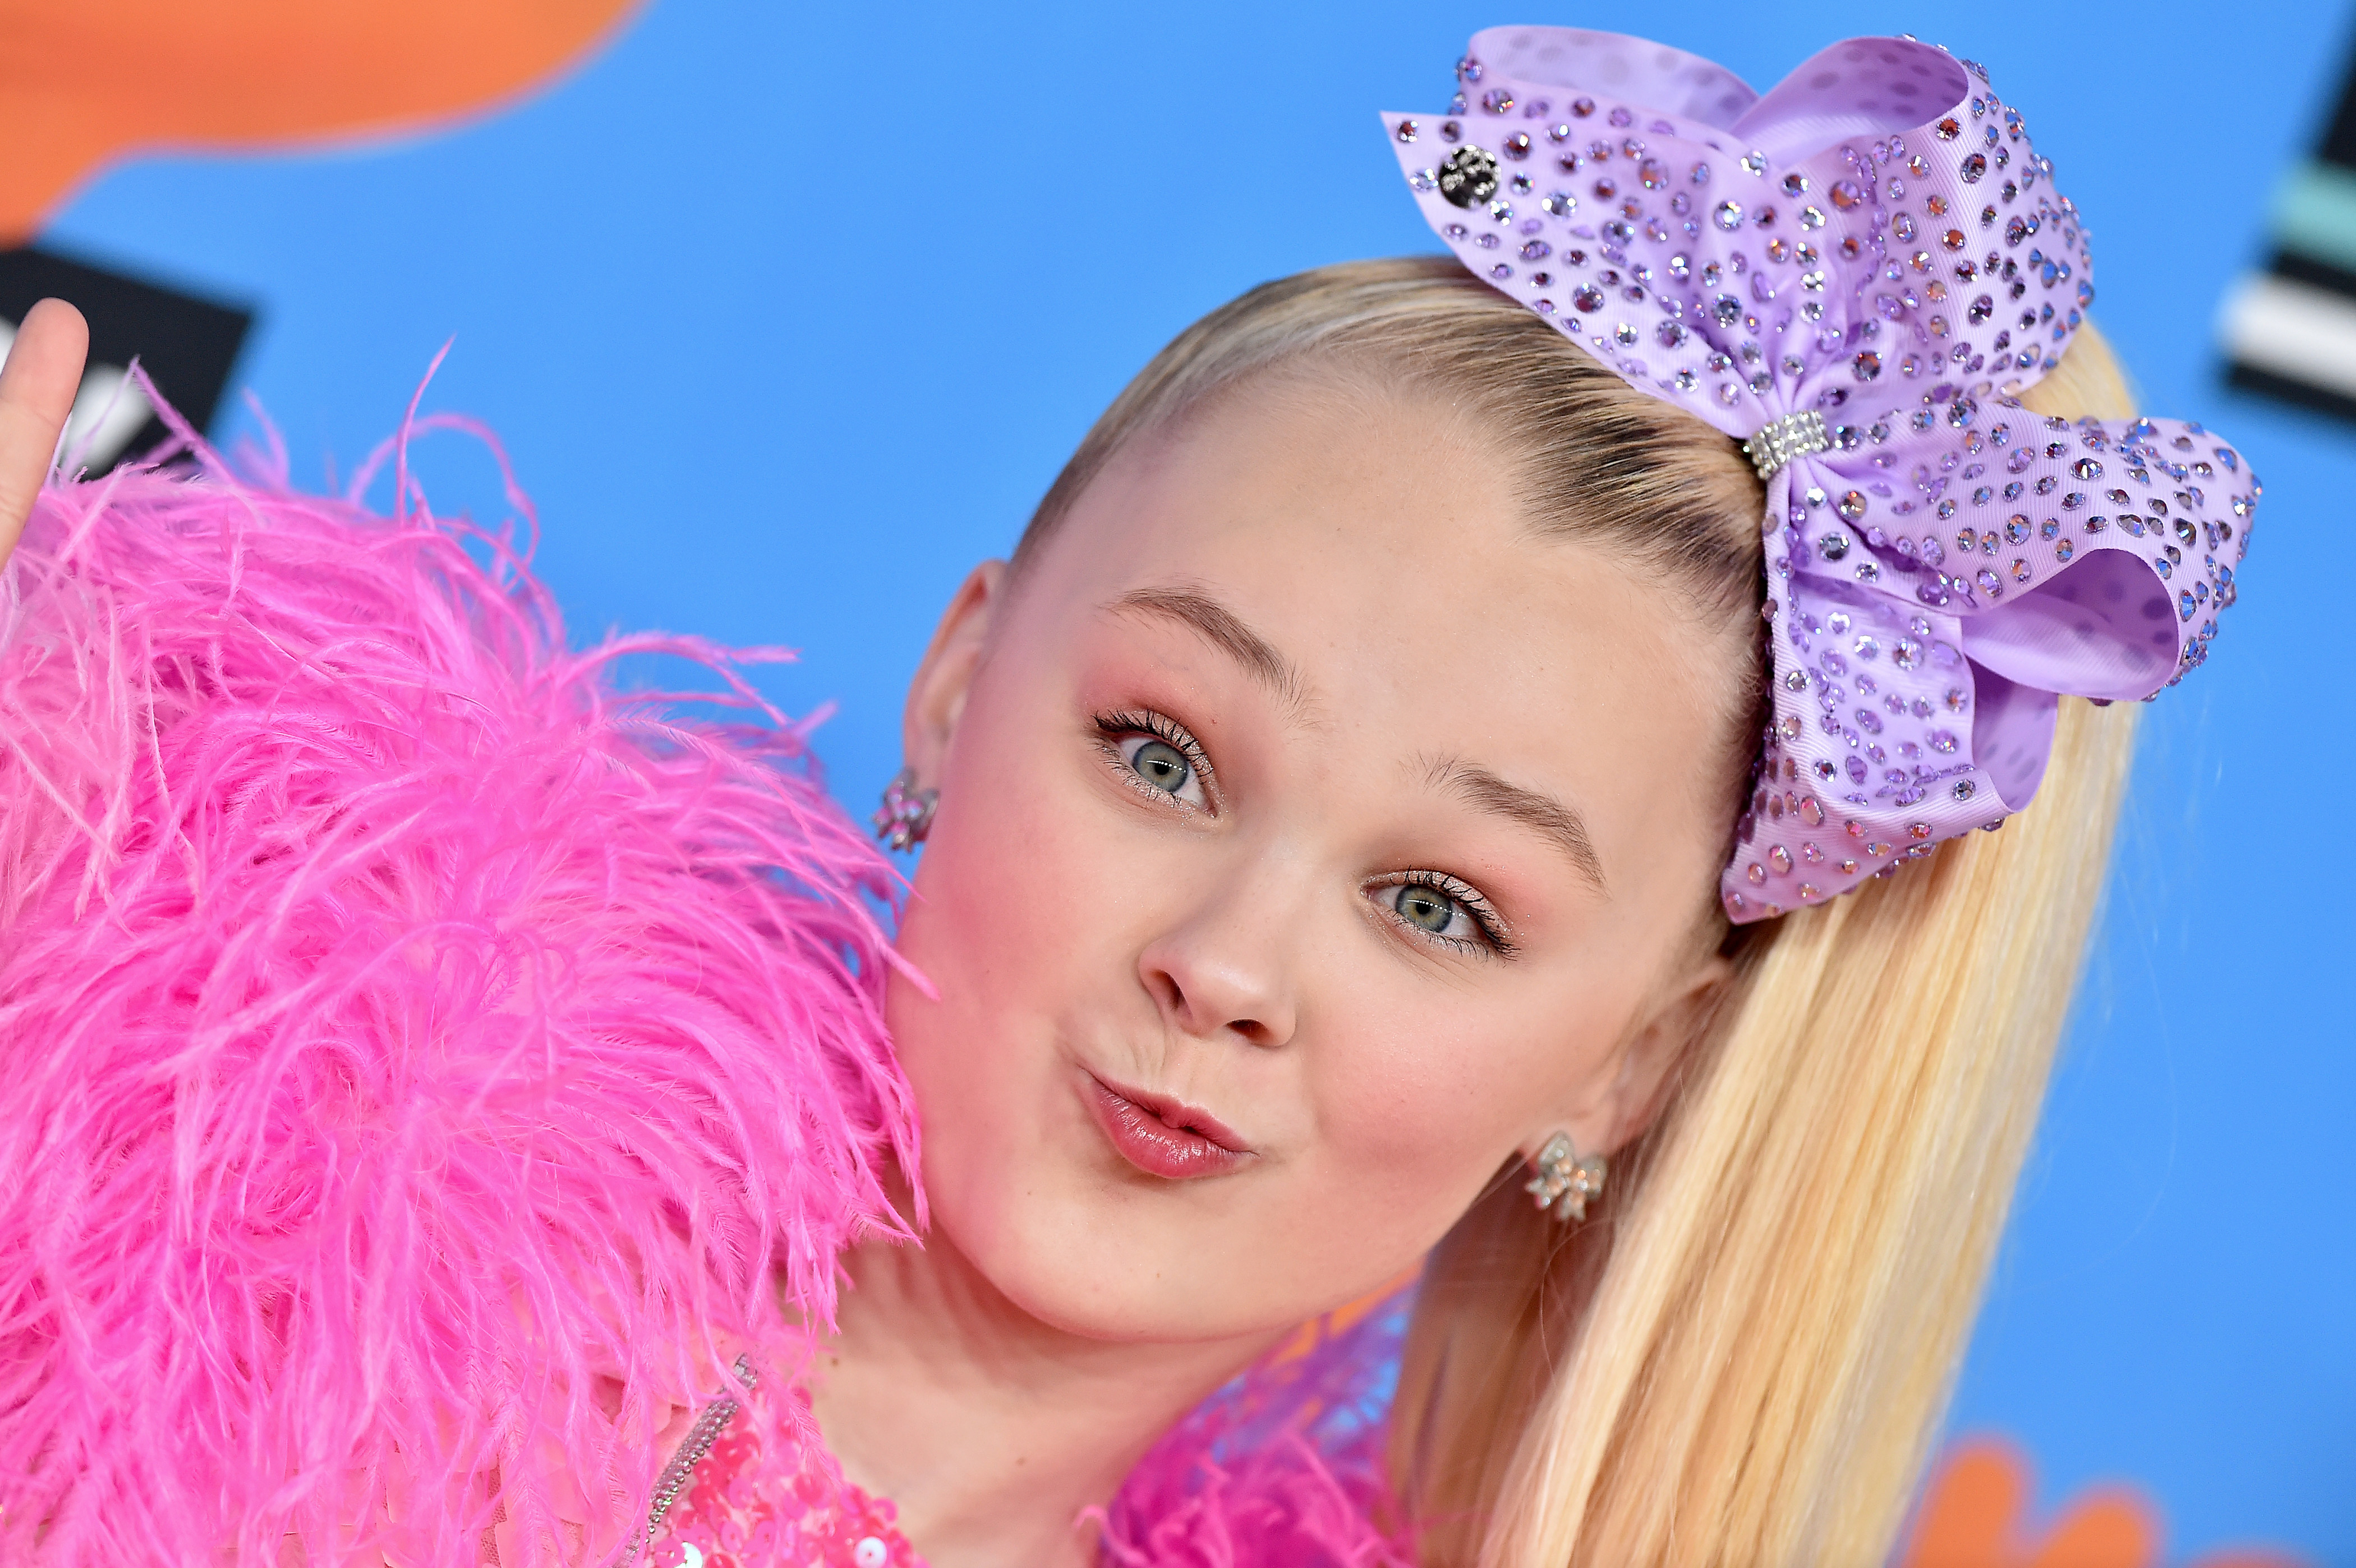 JoJo Siwa poses with a large purple bow, pink fringed outfit, pouting at the camera